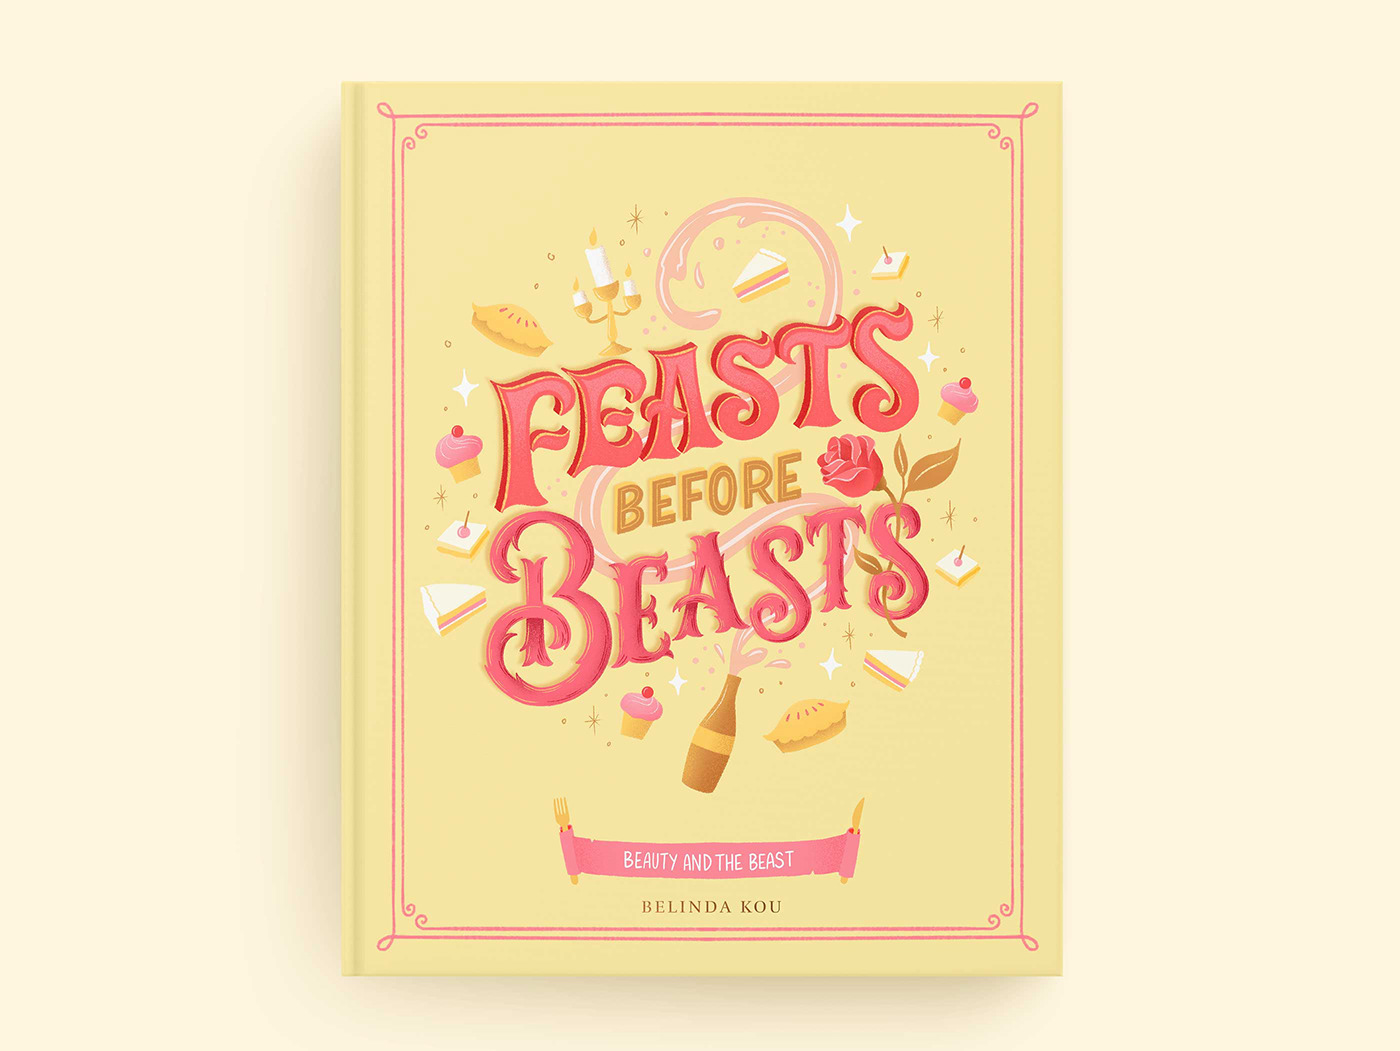 Beauty and the Beast book cover art featuring hand lettering and illustrations of fairy tale 